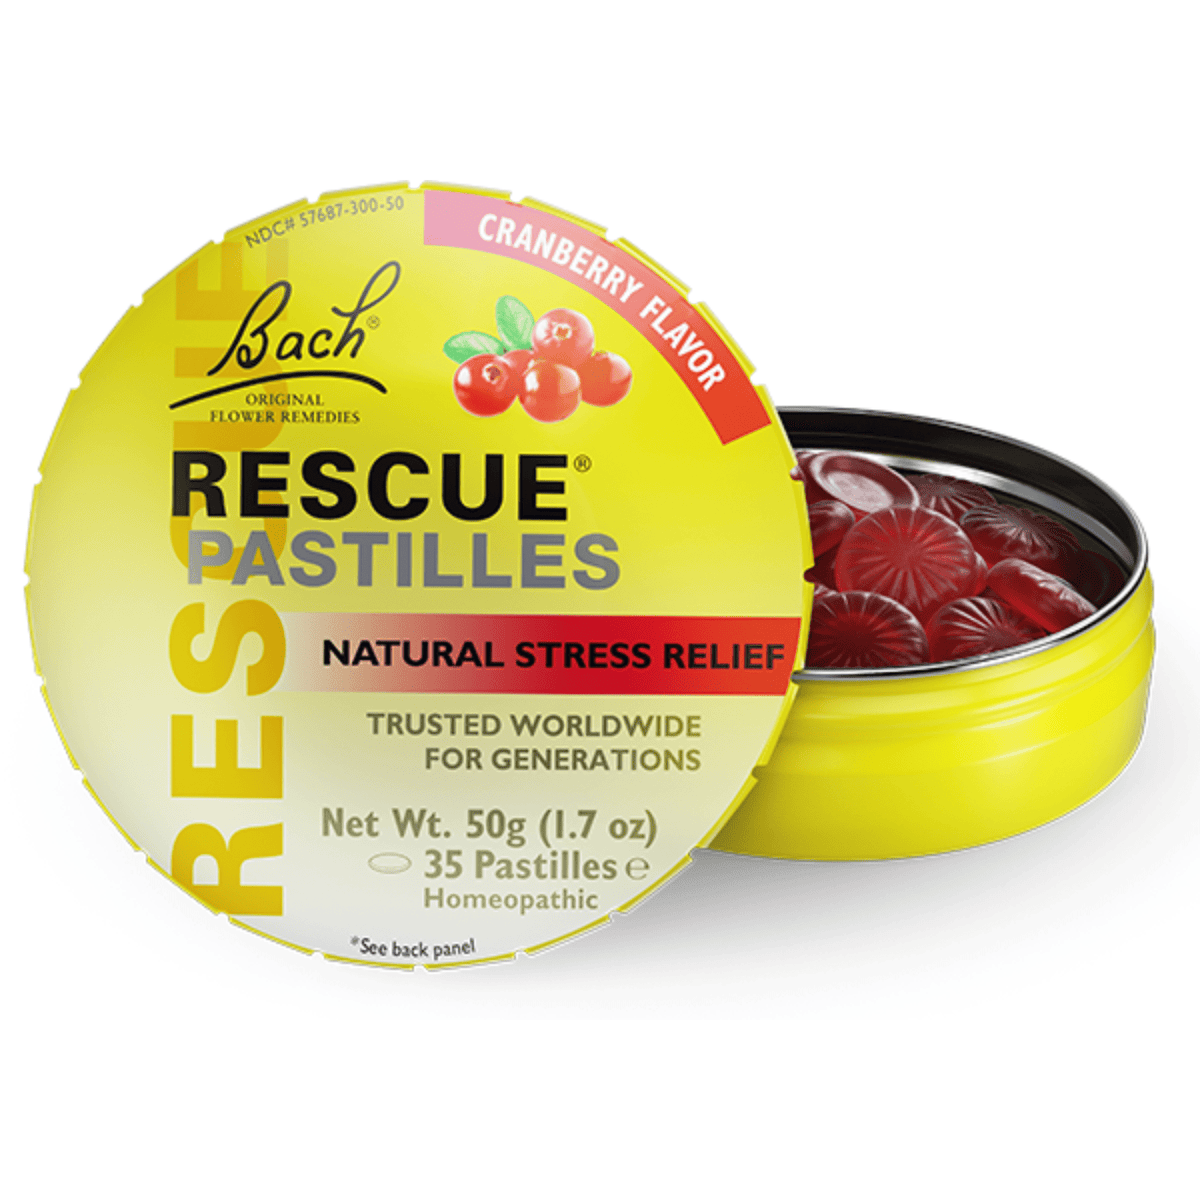 Primary Image of Cranberry Rescue Remedy Pastilles